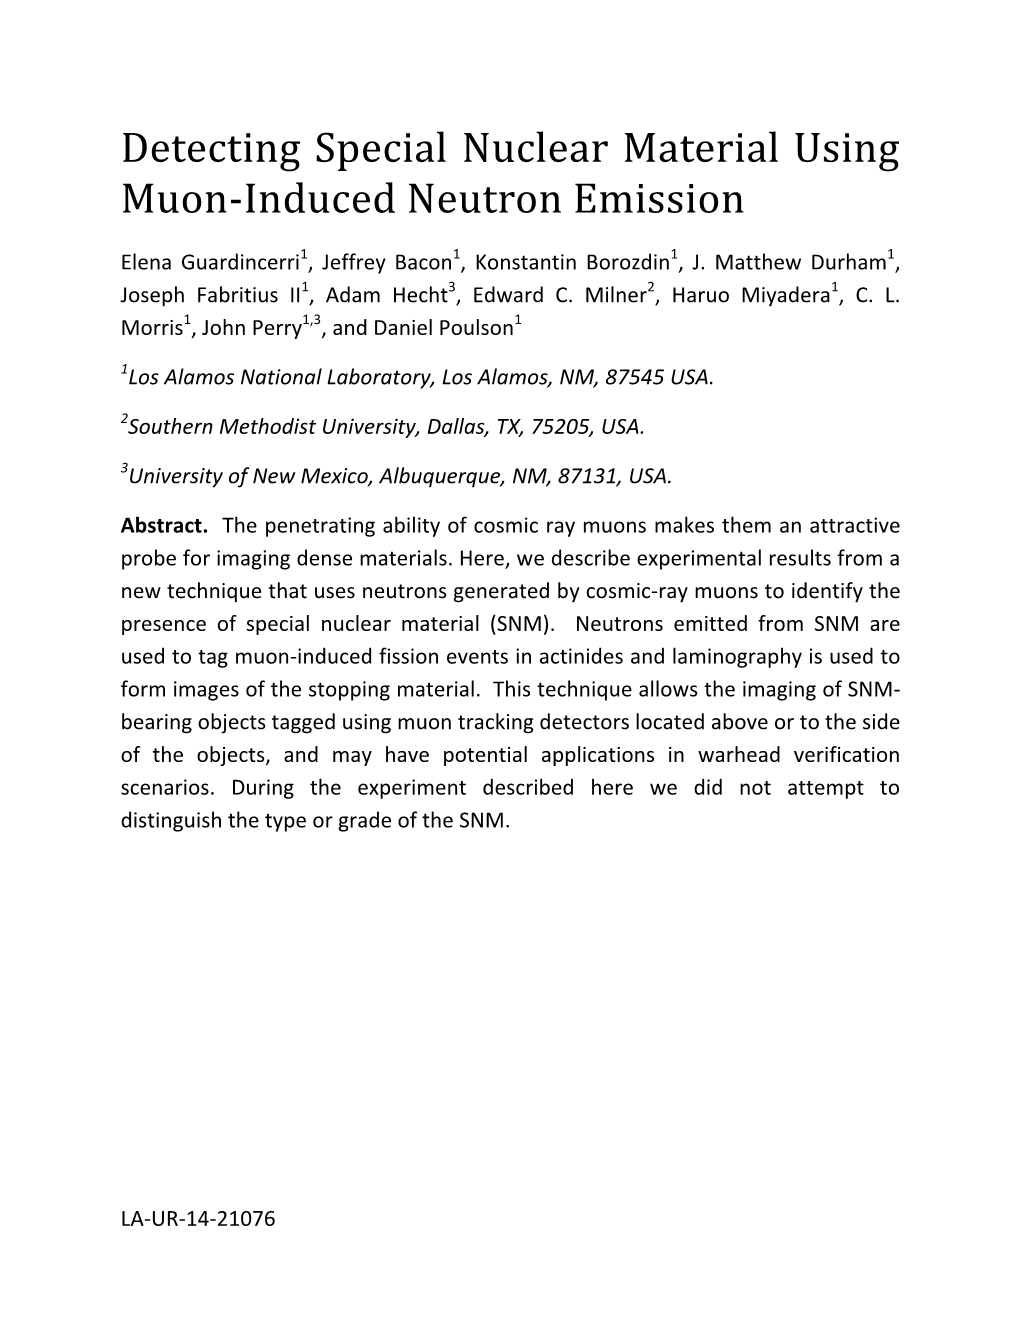 Detecting Special Nuclear Material Using Muon-Induced Neutron Emission